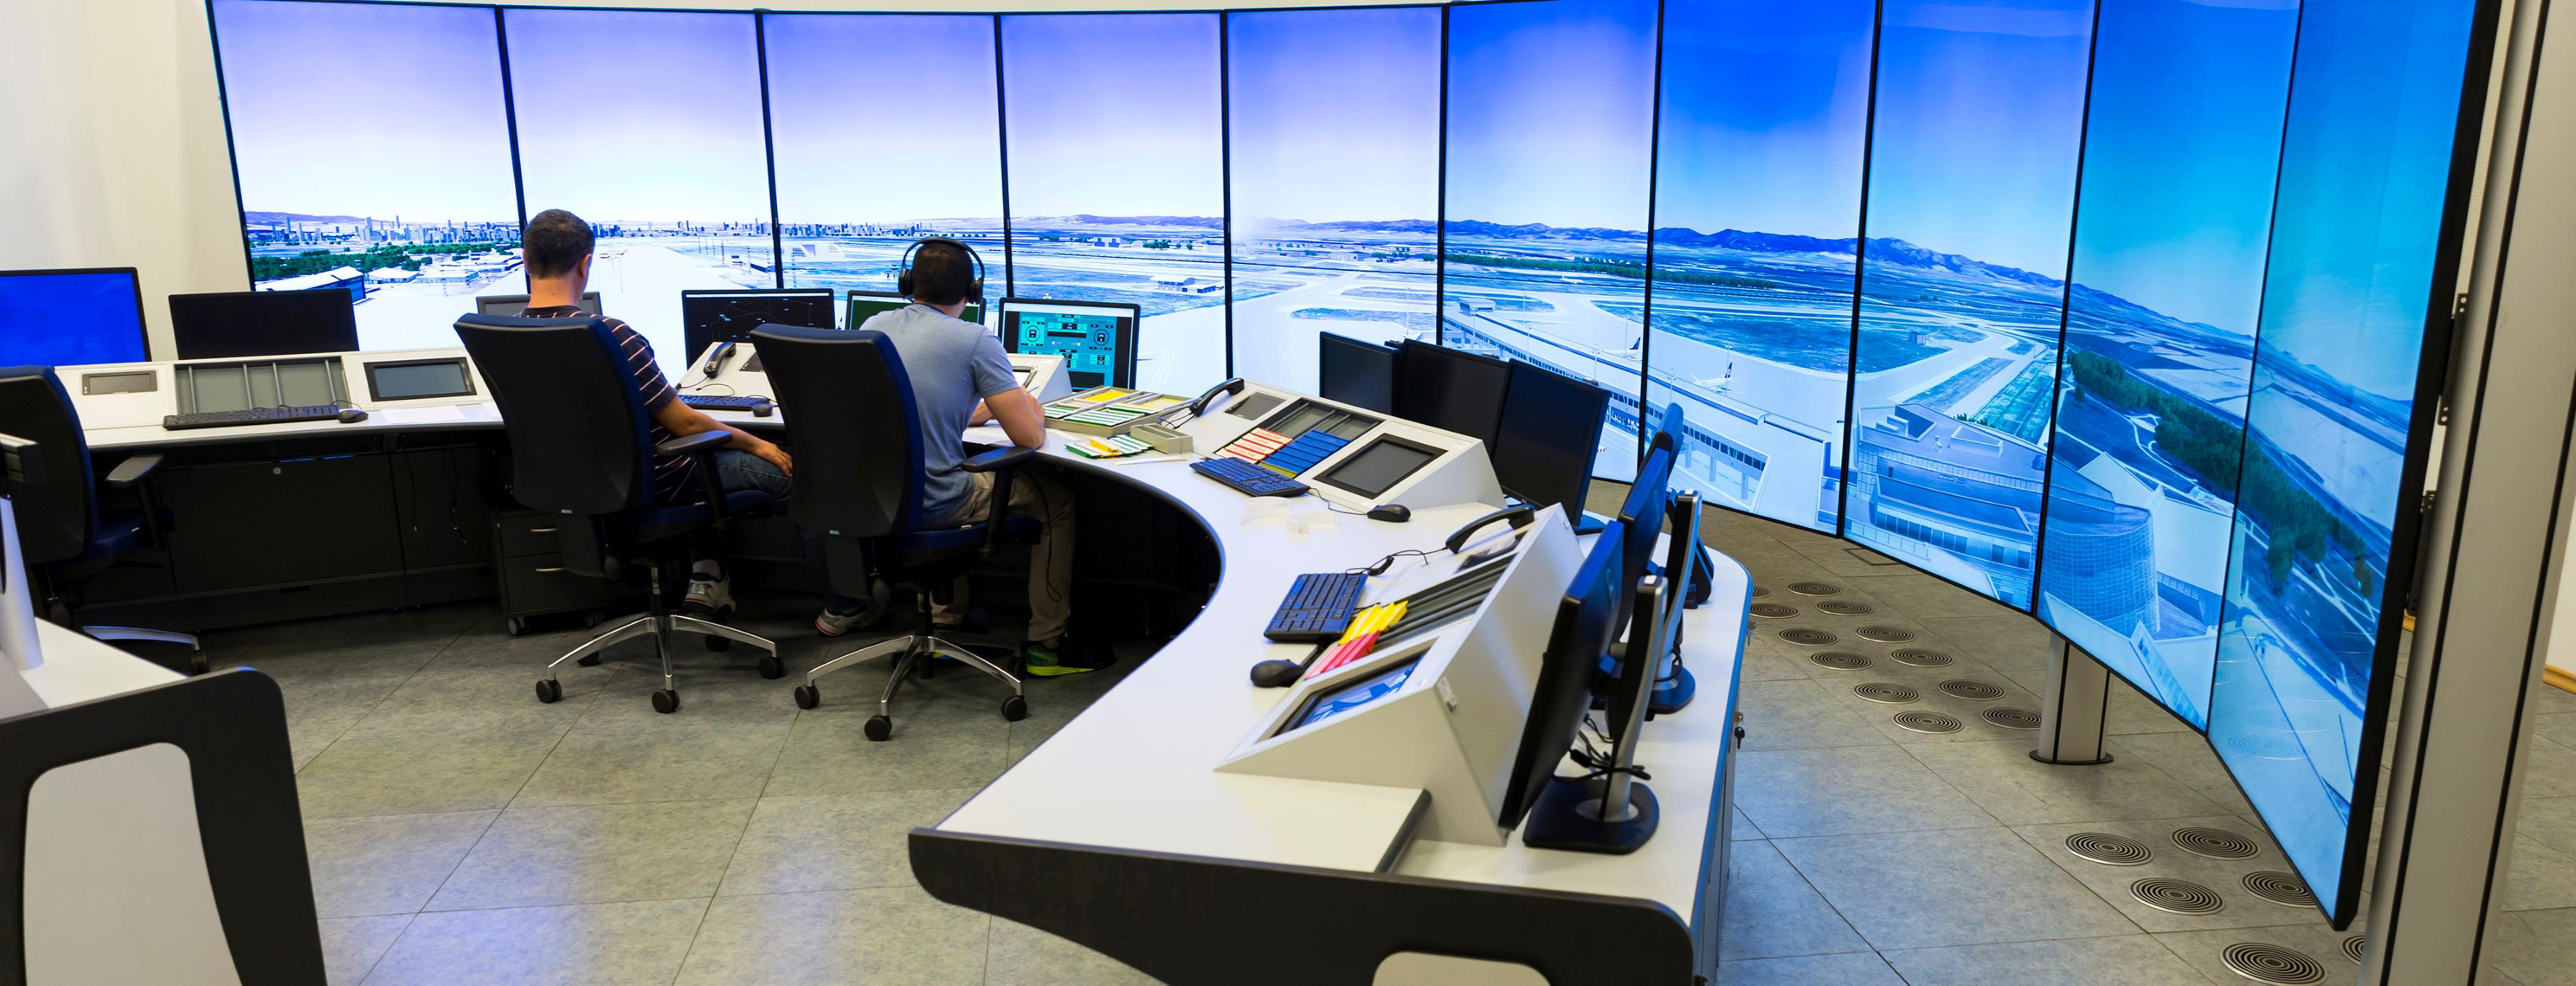 Air Traffic Control activities occur in a high technology tower 